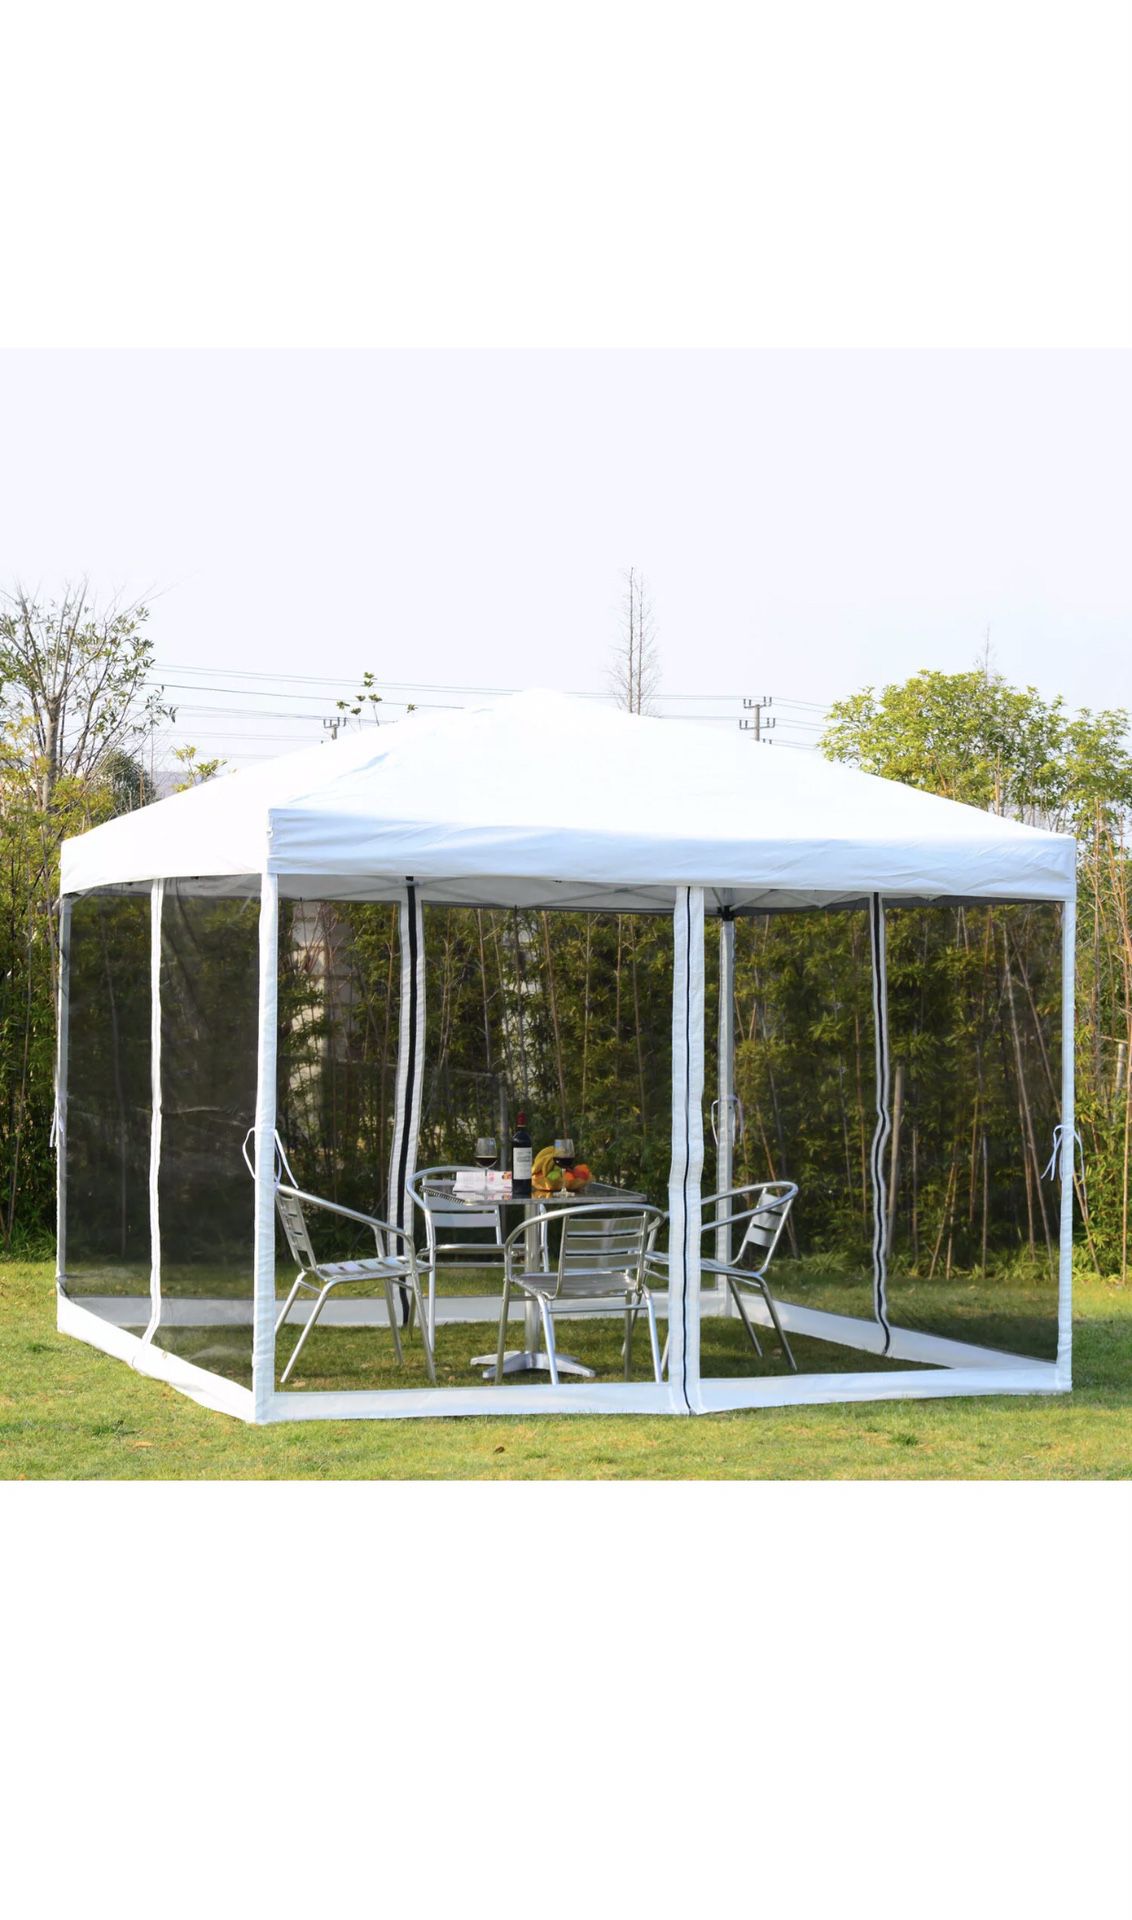 10x10 White Outdoor Patio Easy Pop Up Party Gazebo Canopy Tent Mesh Walls